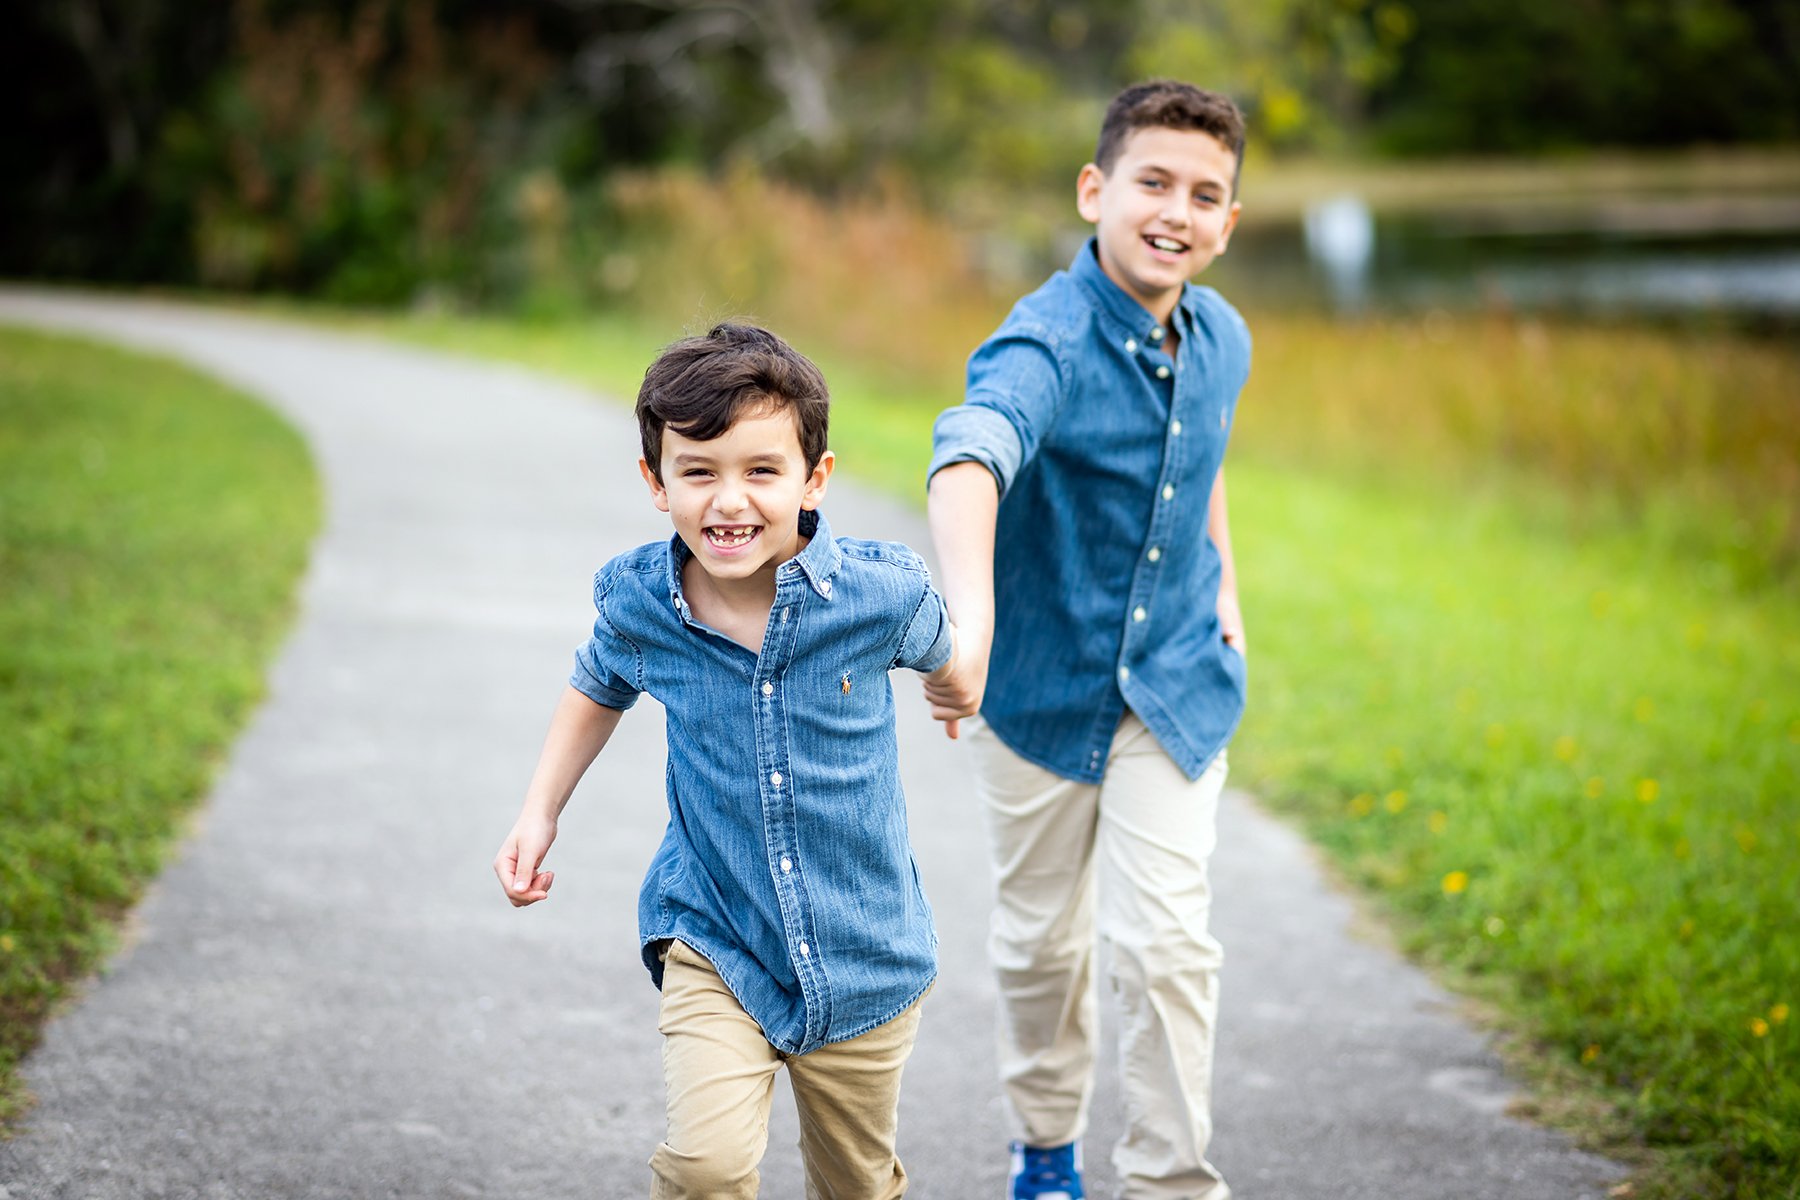 Brothers running and smiling together